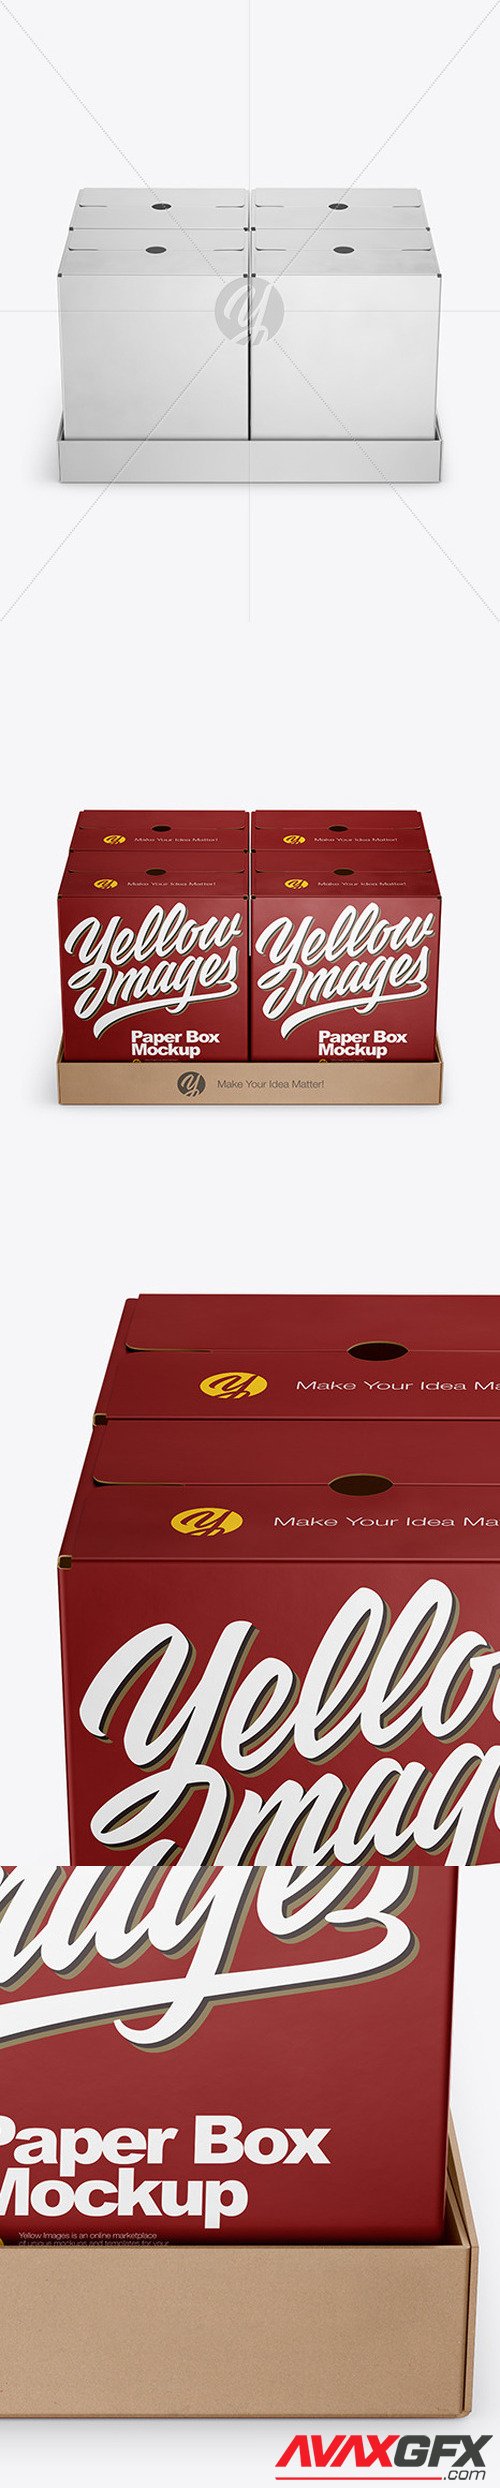 Paper Palette With Four Textured Boxes Mockup 50198 [TIF]